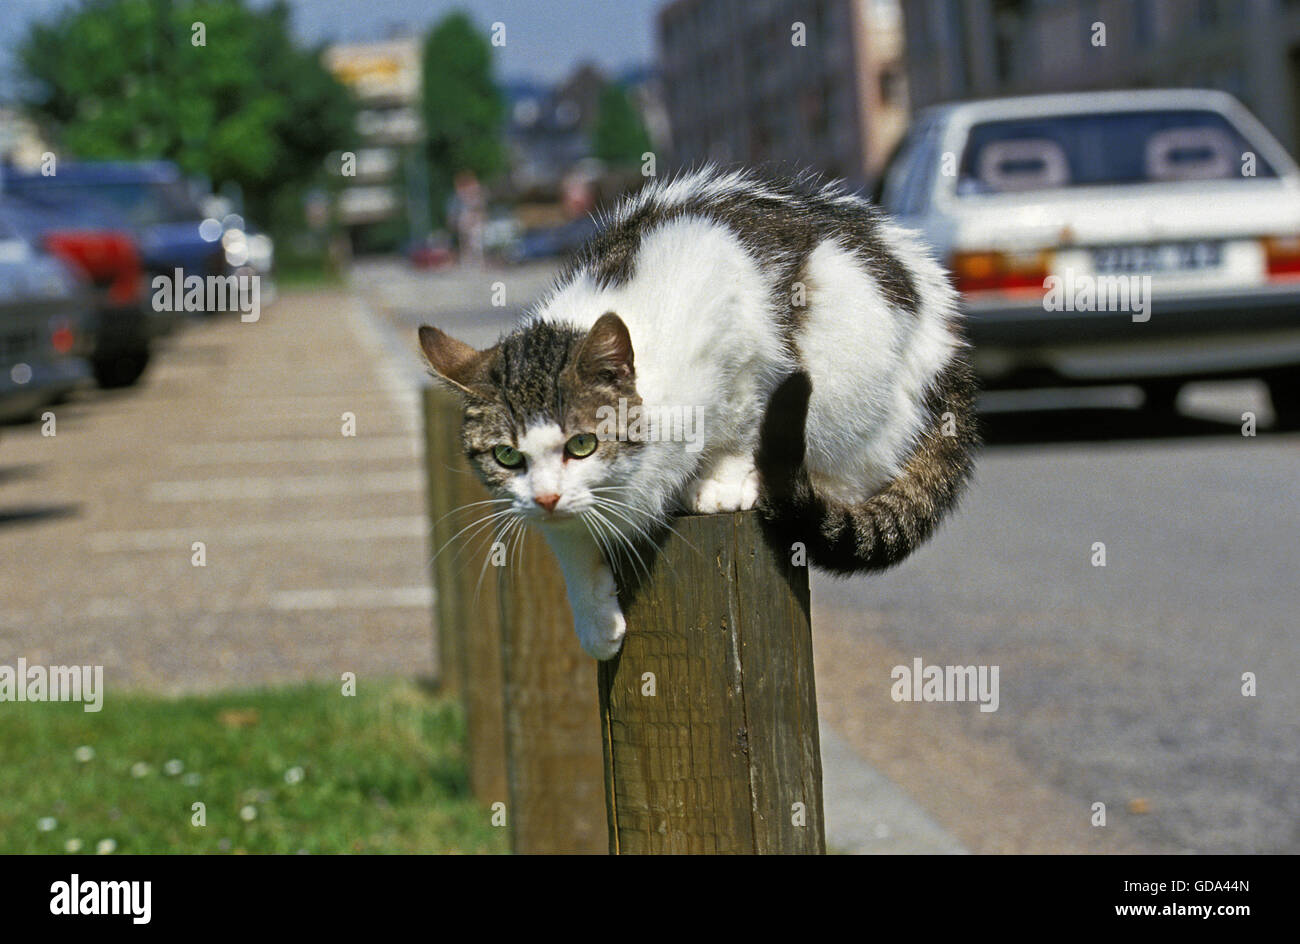 EUROPEAN DOMESTIC CAT, ADULT ON POST IN A CITY Stock Photo